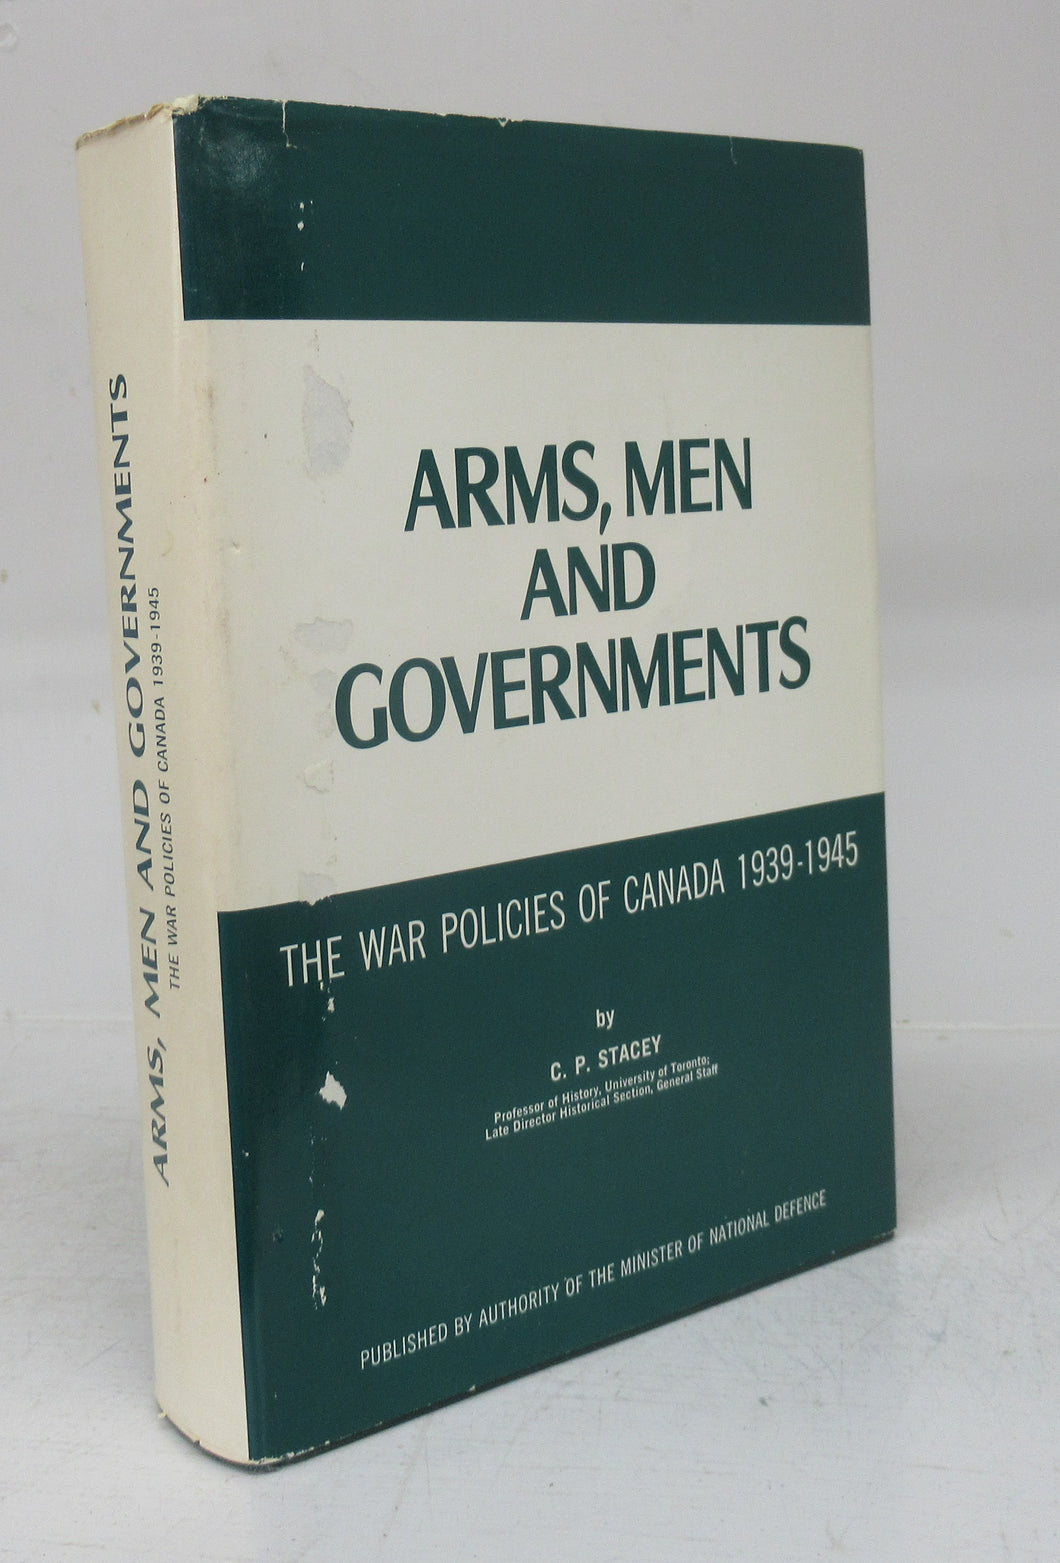 Arms, Men and Governments: The War Policies of Canada 1939-1945